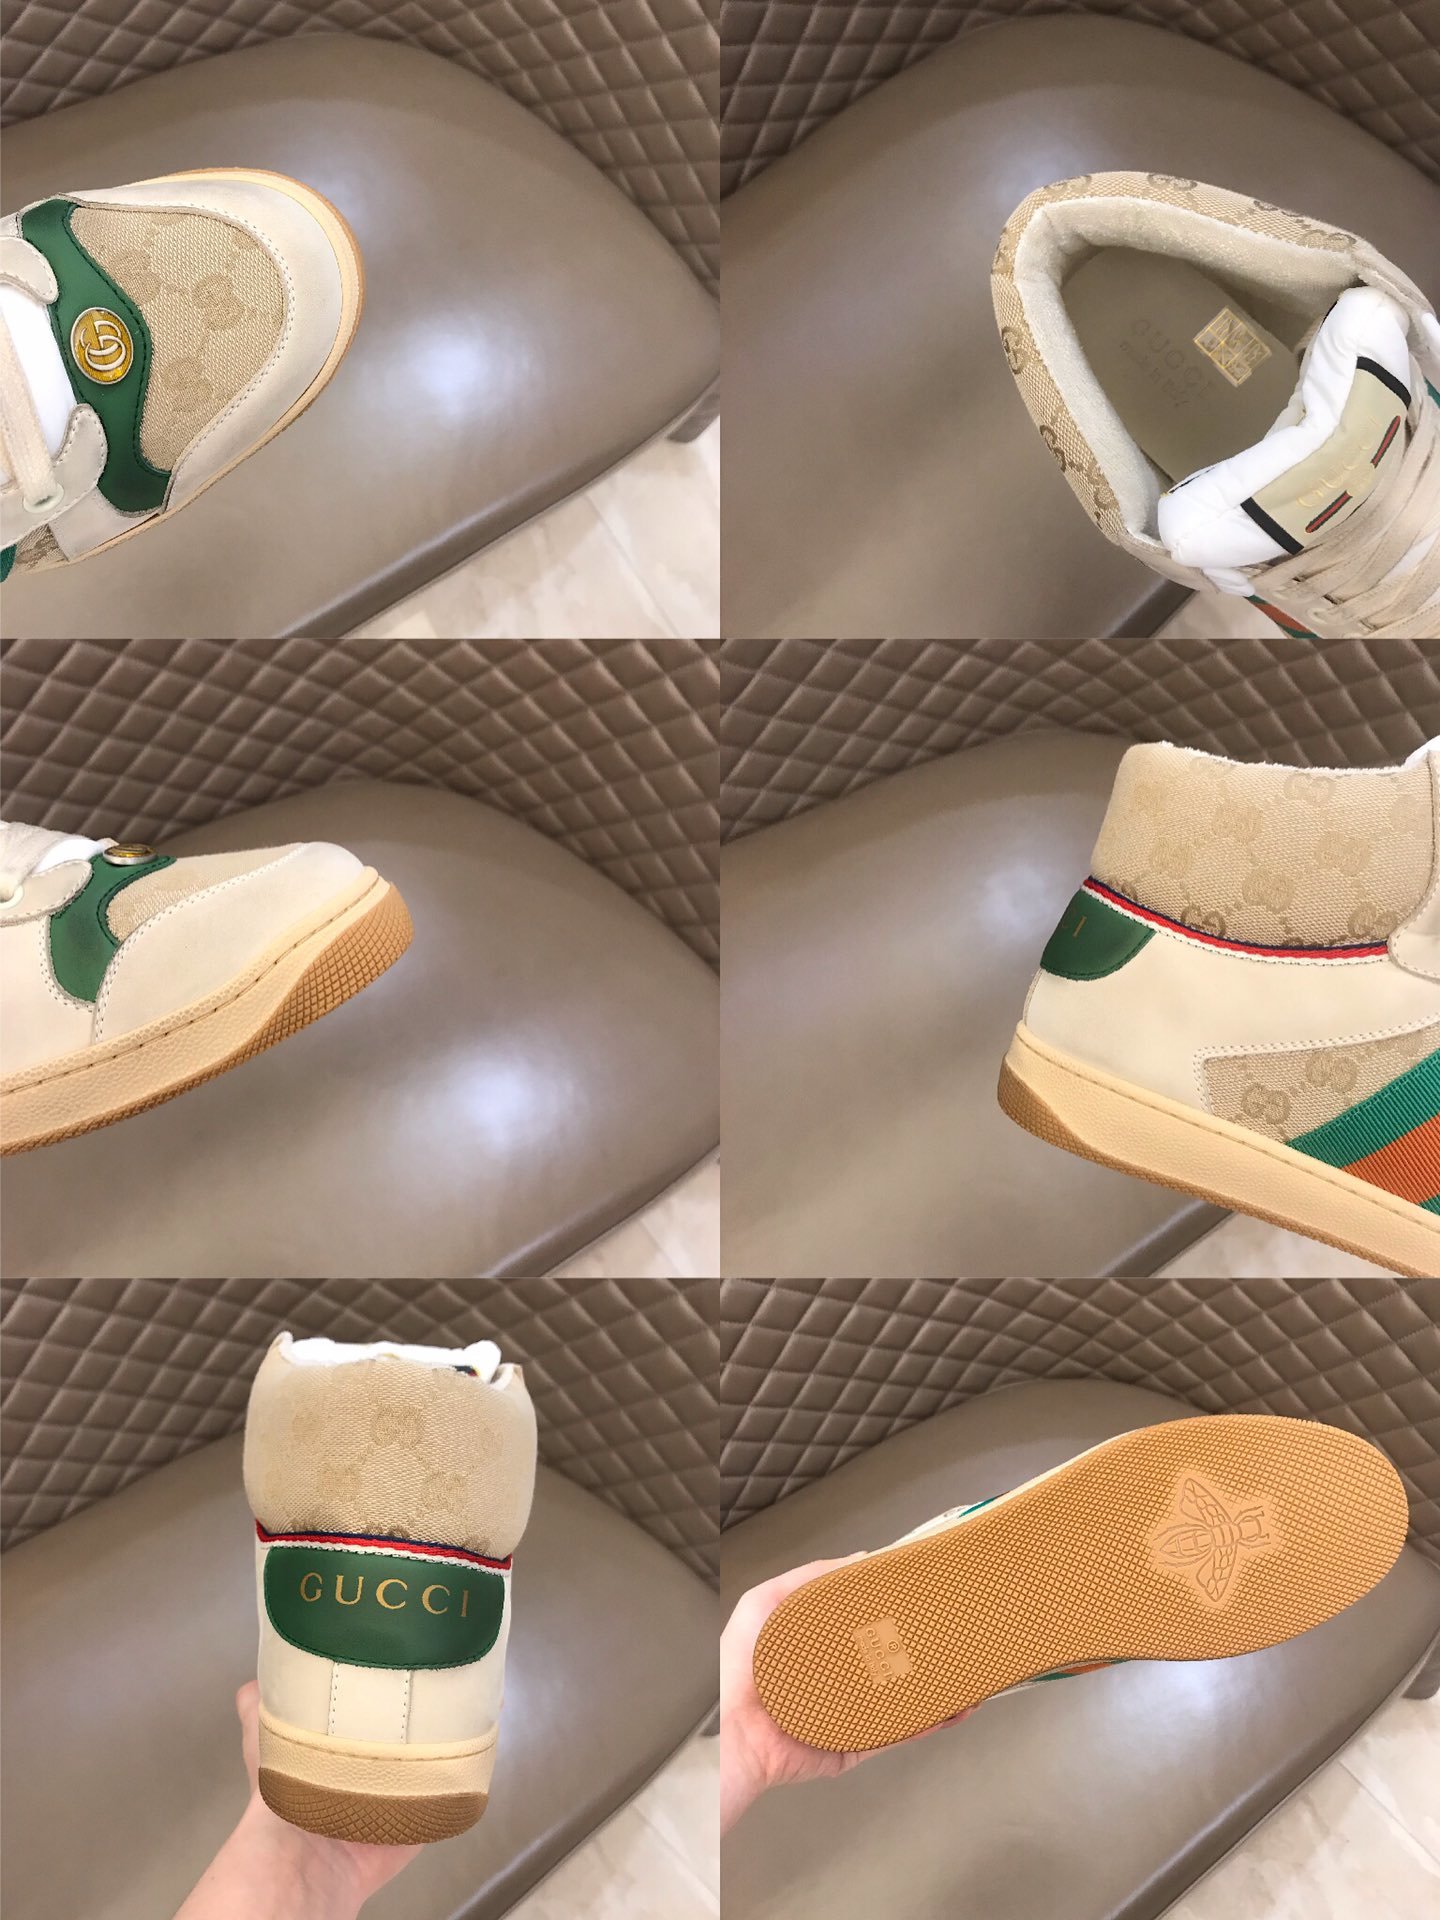 Gucci High-to High Quality Sneakers Beige and GG print and beige rubber soles  MS021076